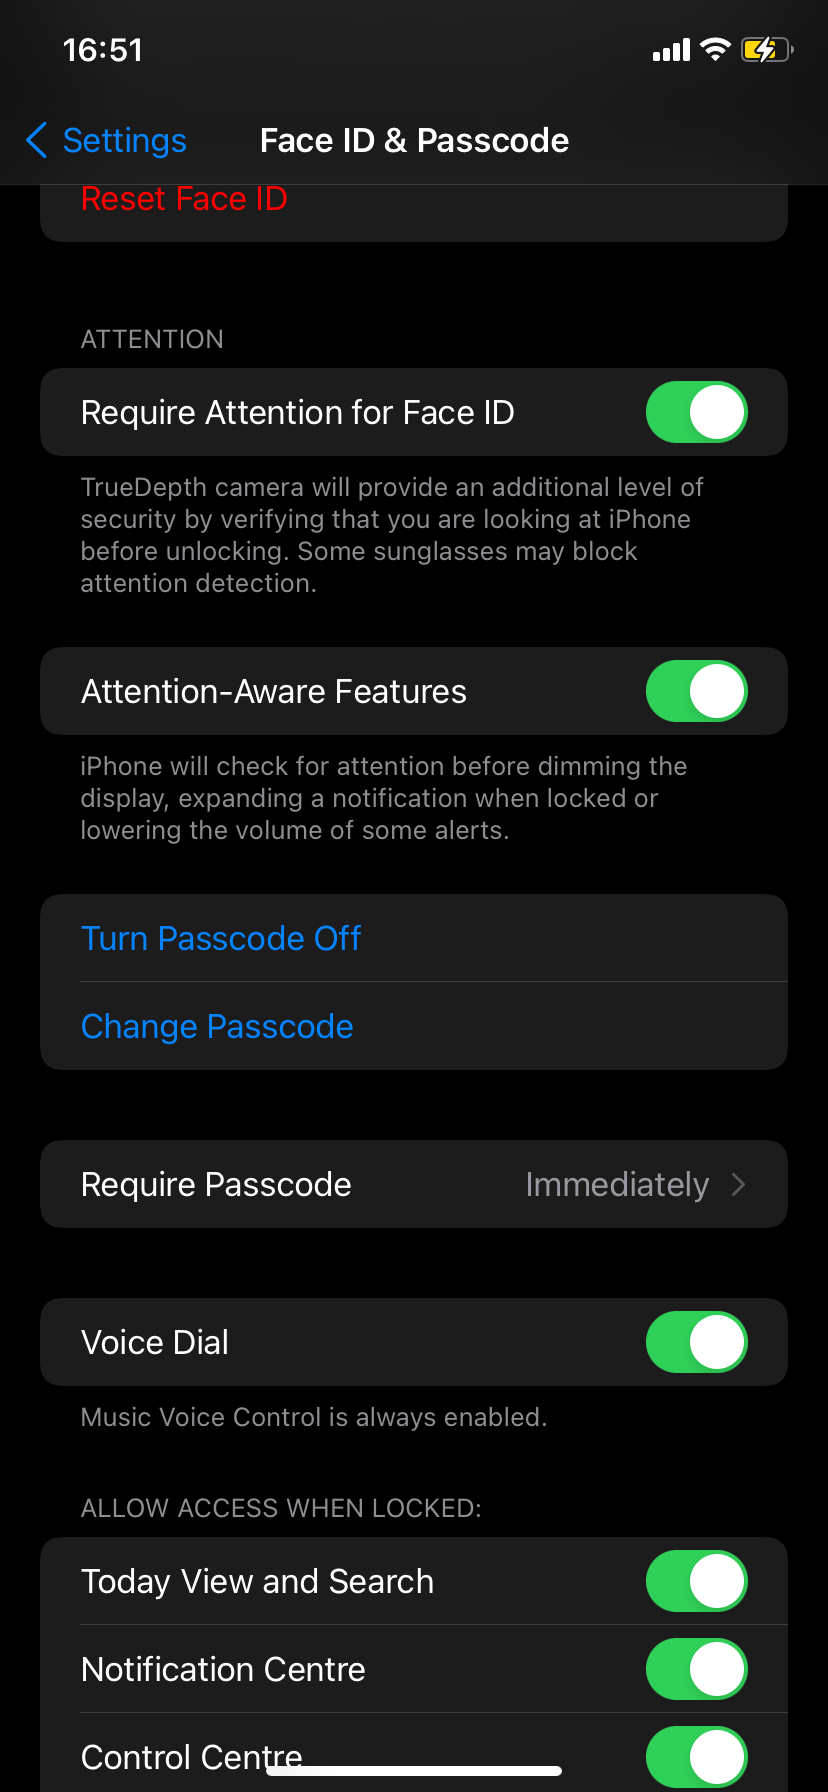 Face ID & Passcode settings page